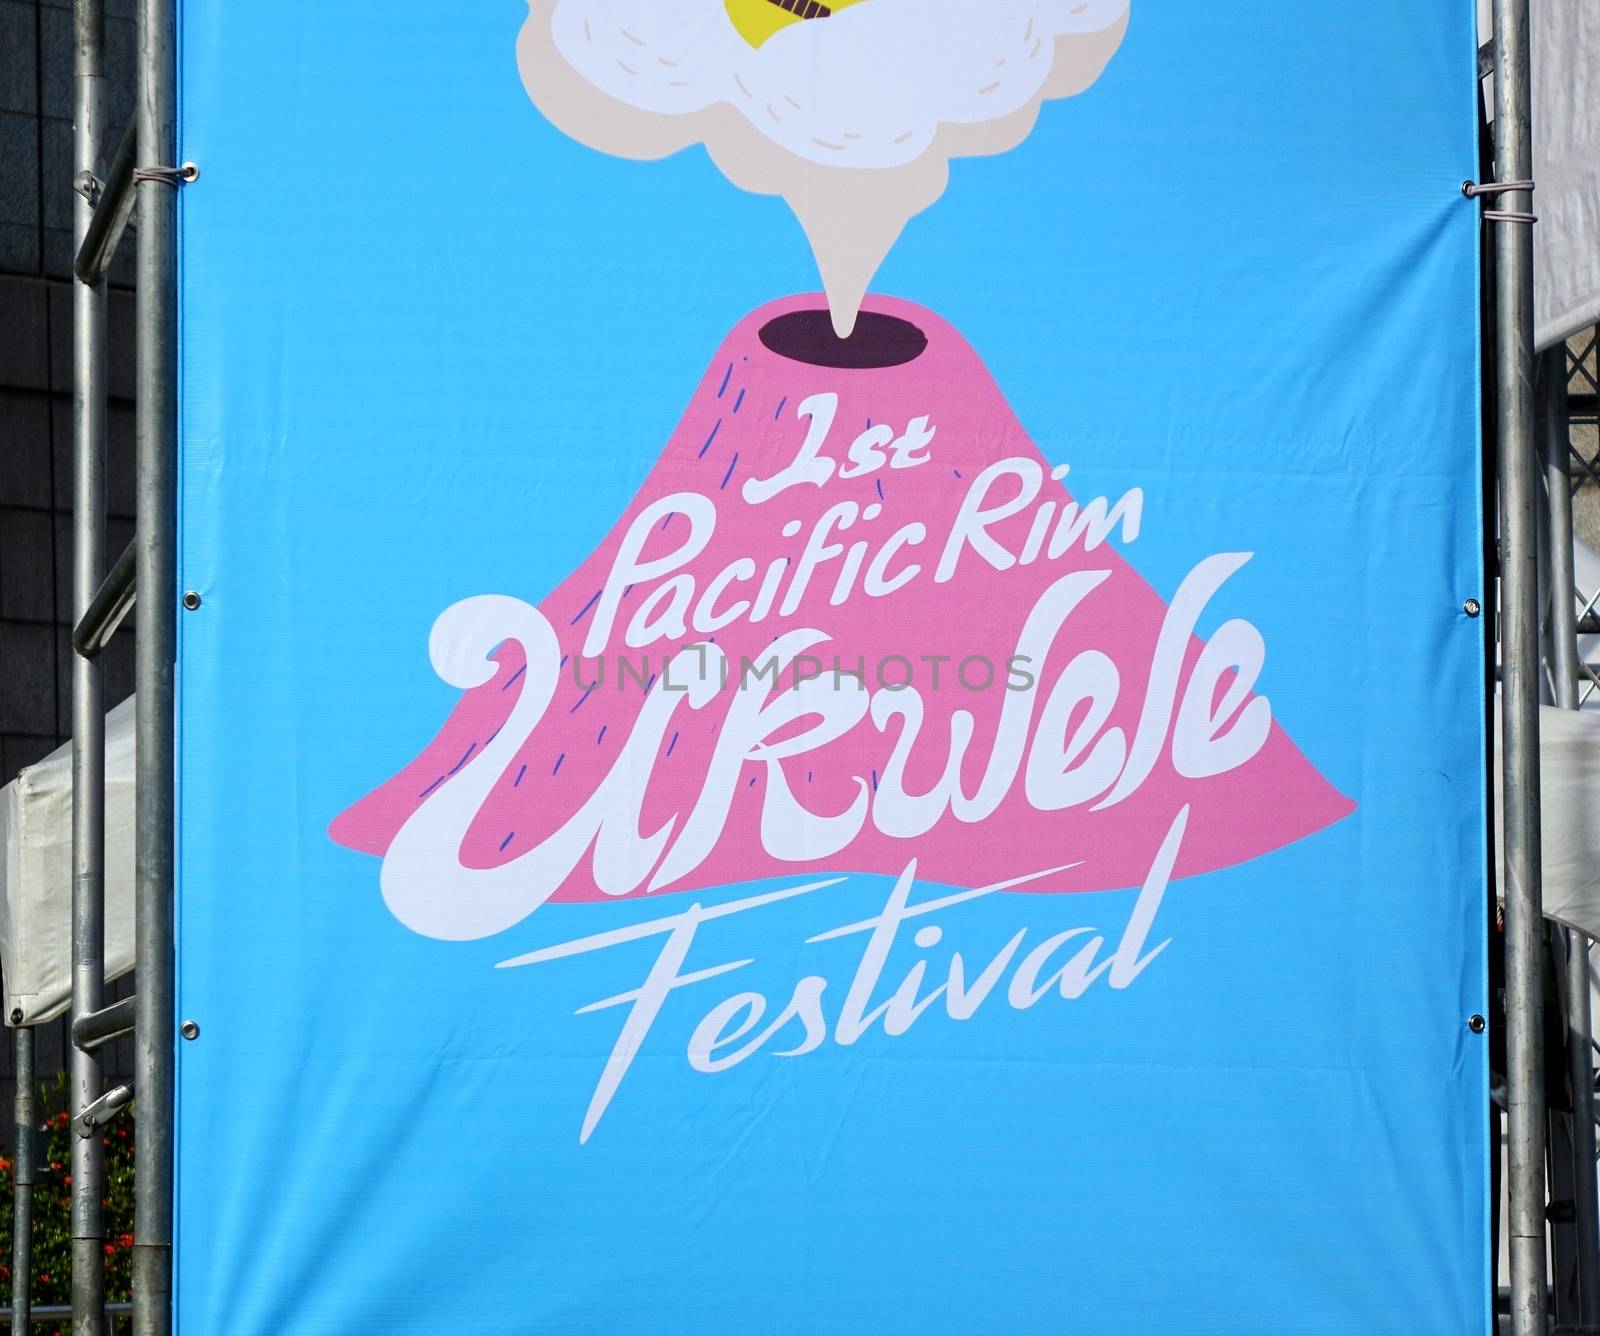 KAOHSIUNG, TAIWAN -- APRIL 23, 2016: The logo of the 1st Pacific Rim Ukulele Festival, a free outdoor event.